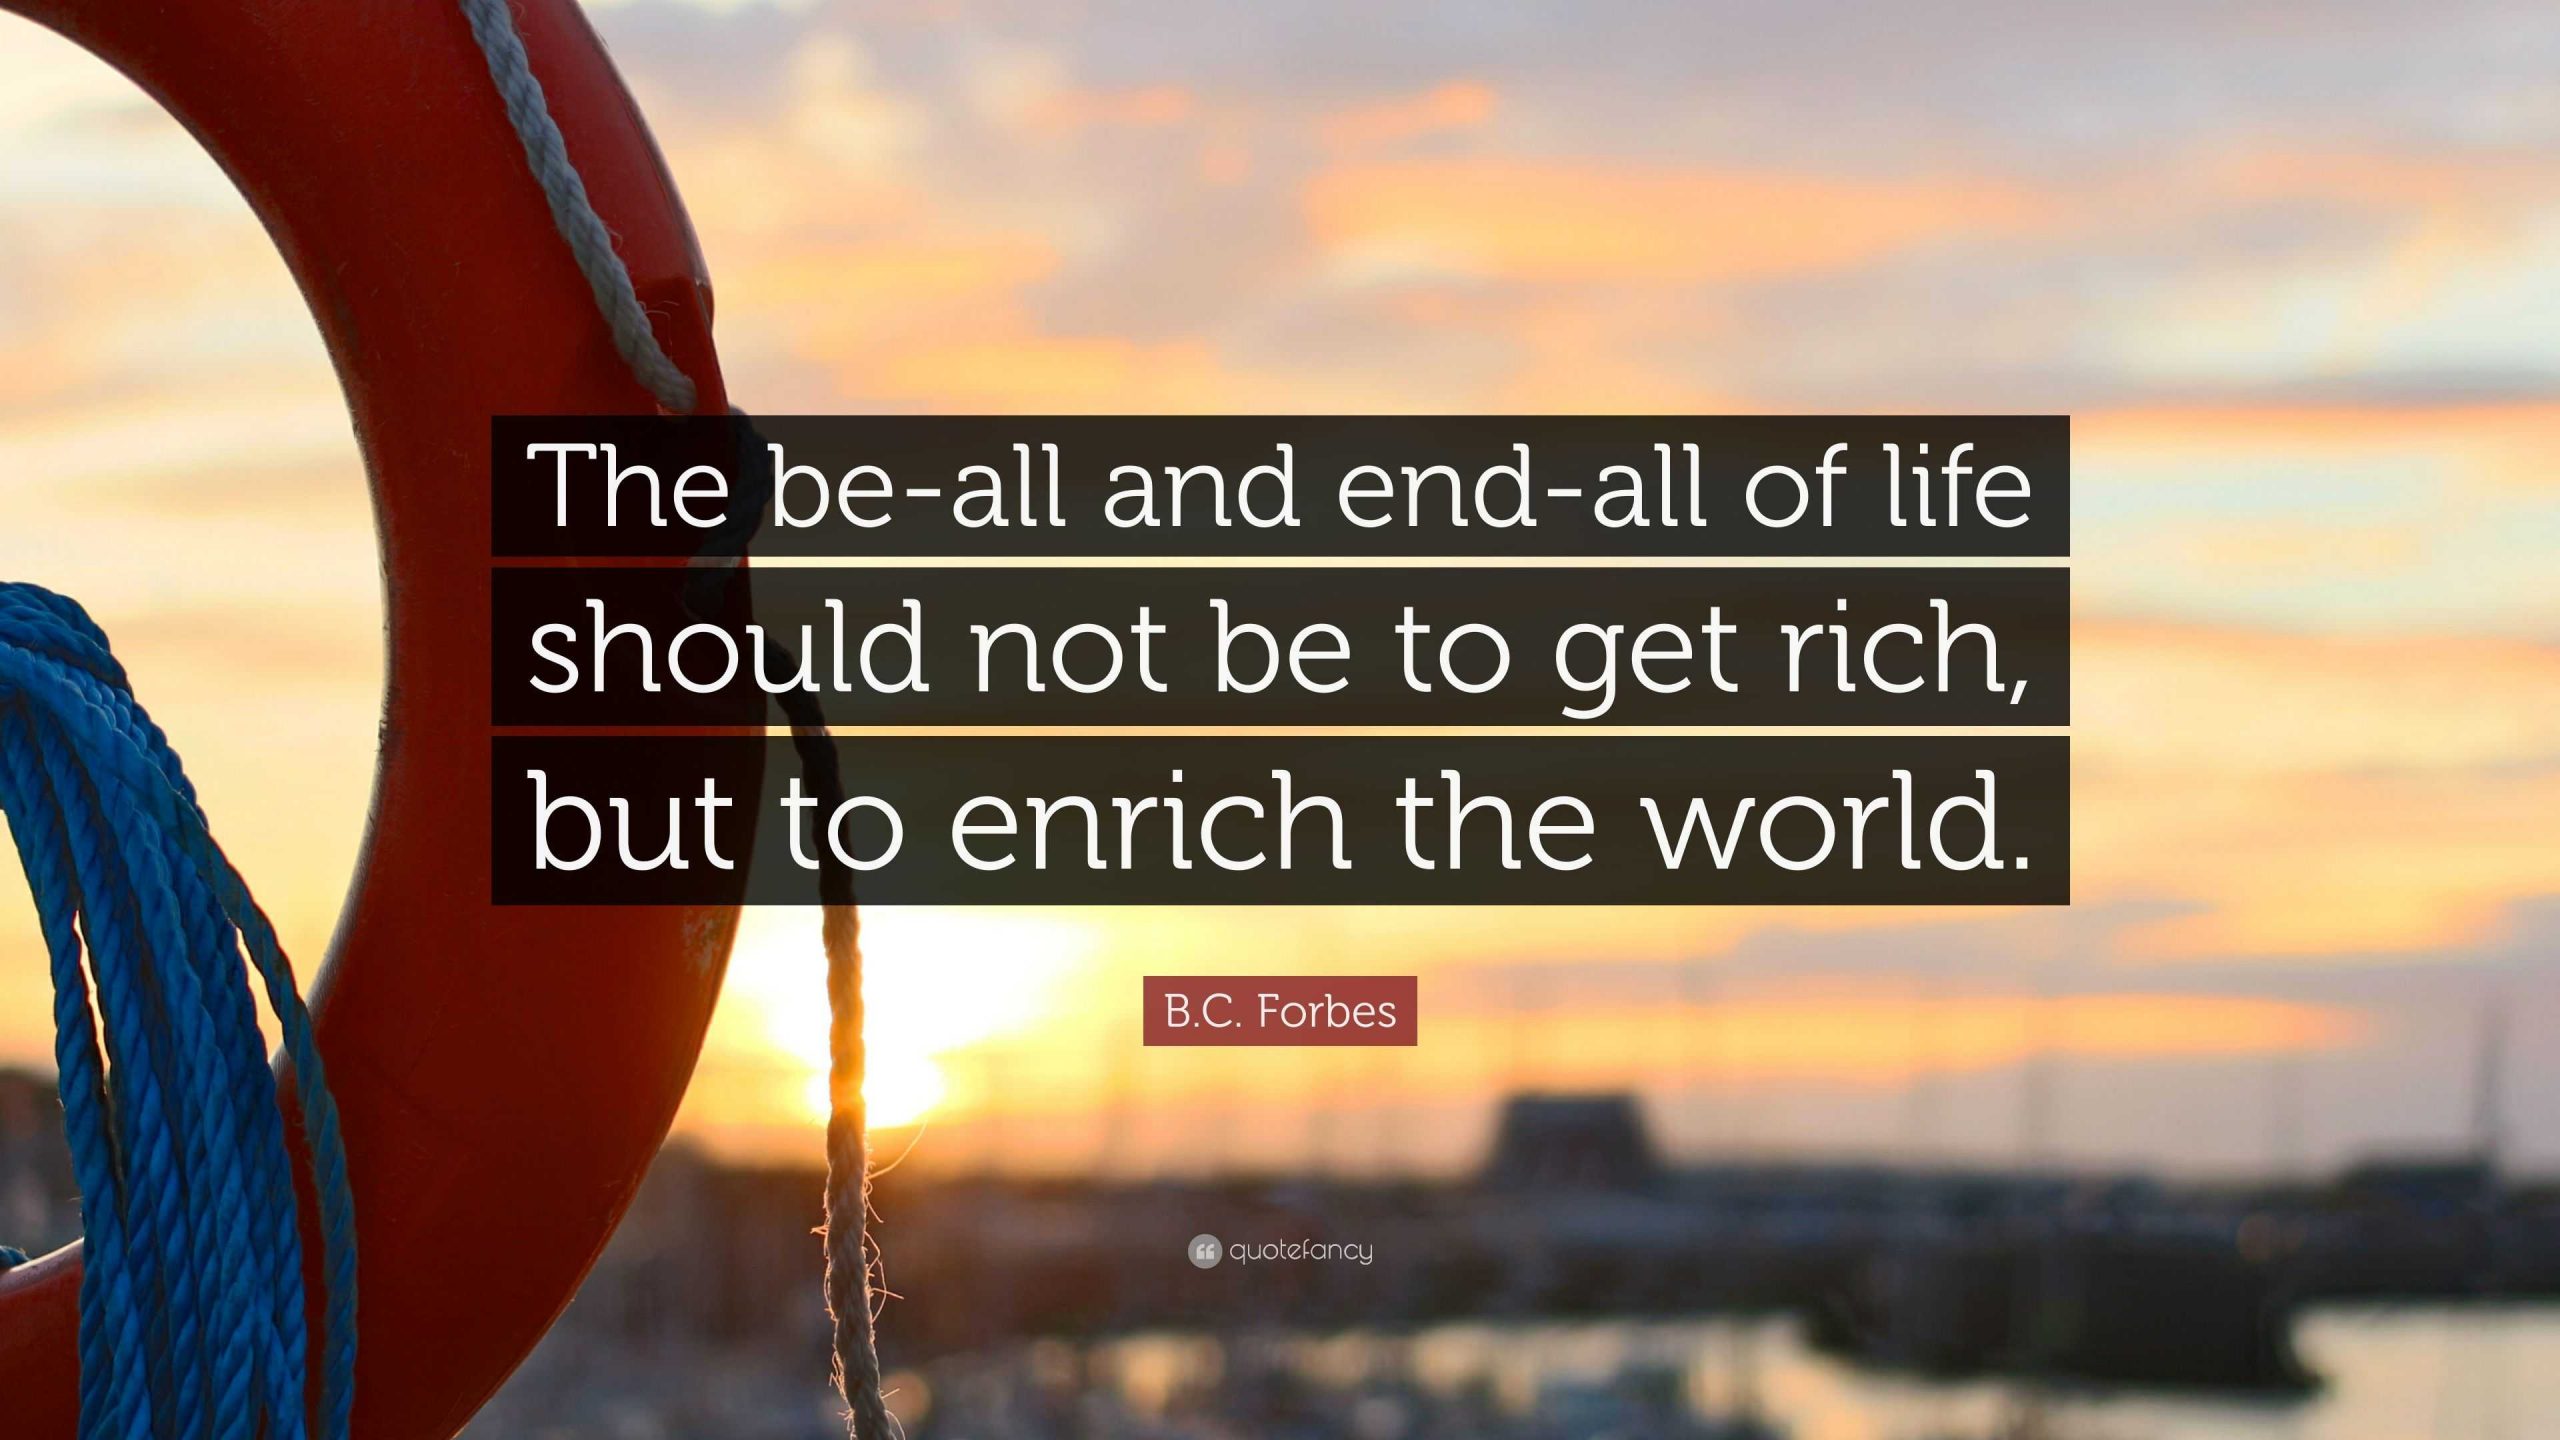 B.C. Forbes Quote: “The be-all and end-all of life should not be to get